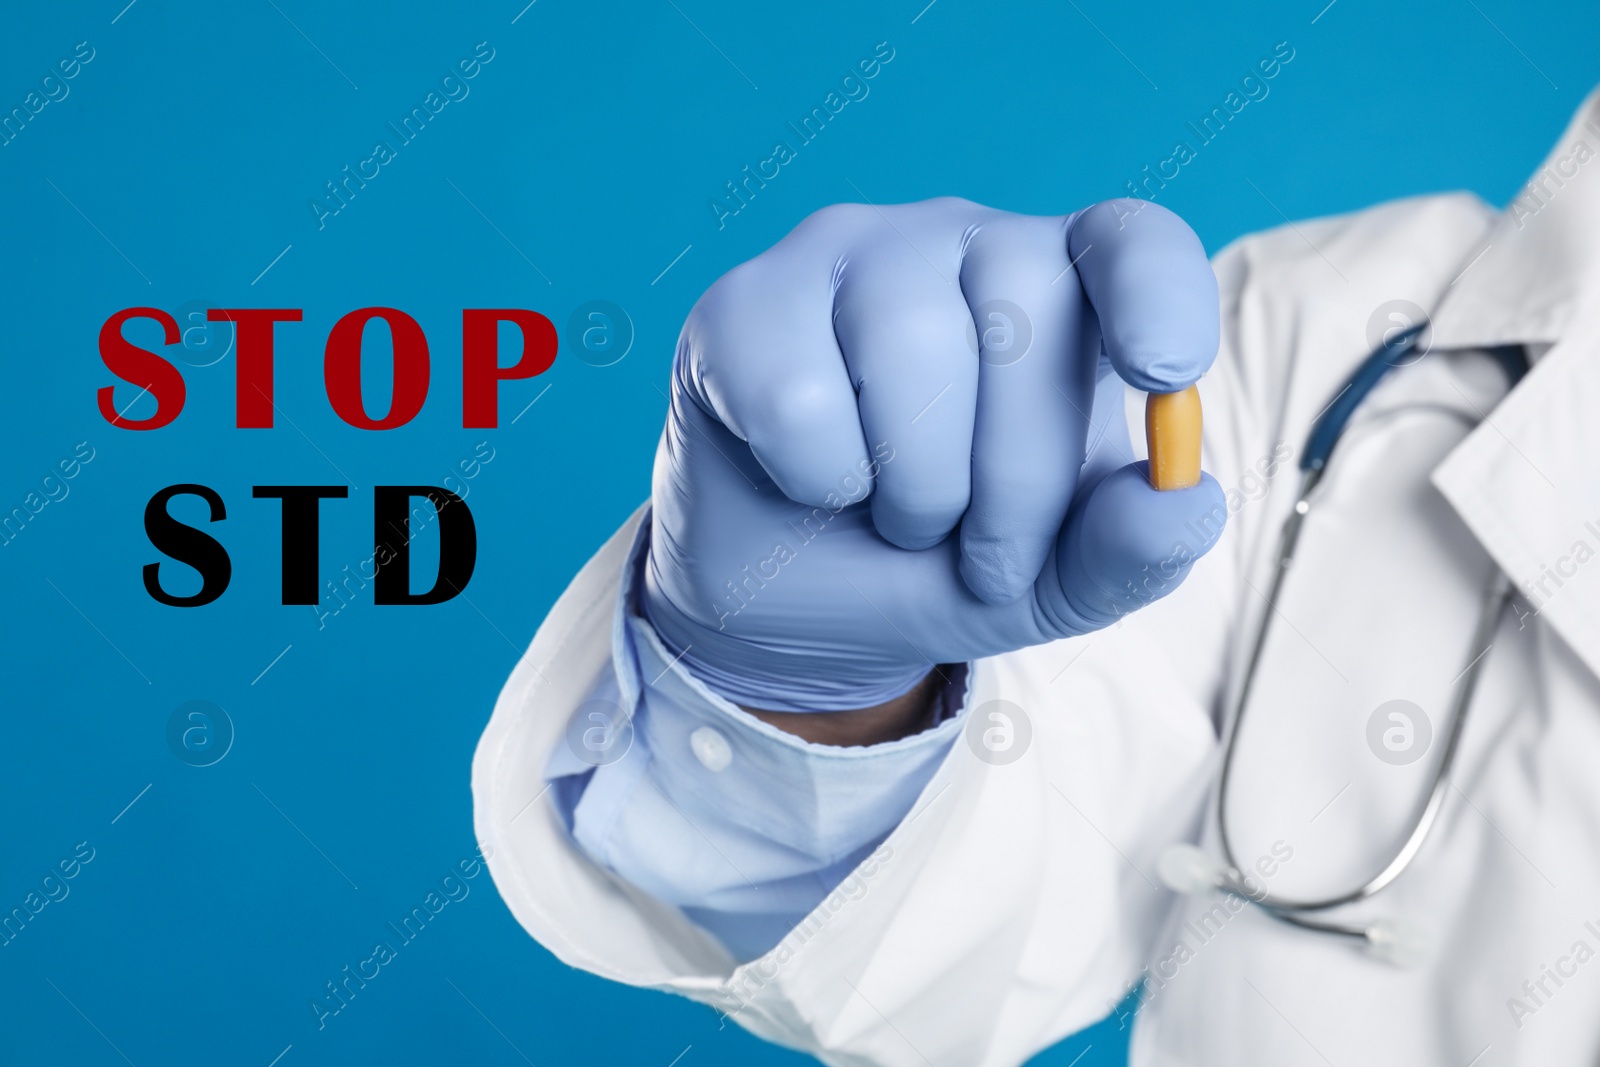 Image of STOP STD. Doctor holding suppository on blue background, closeup